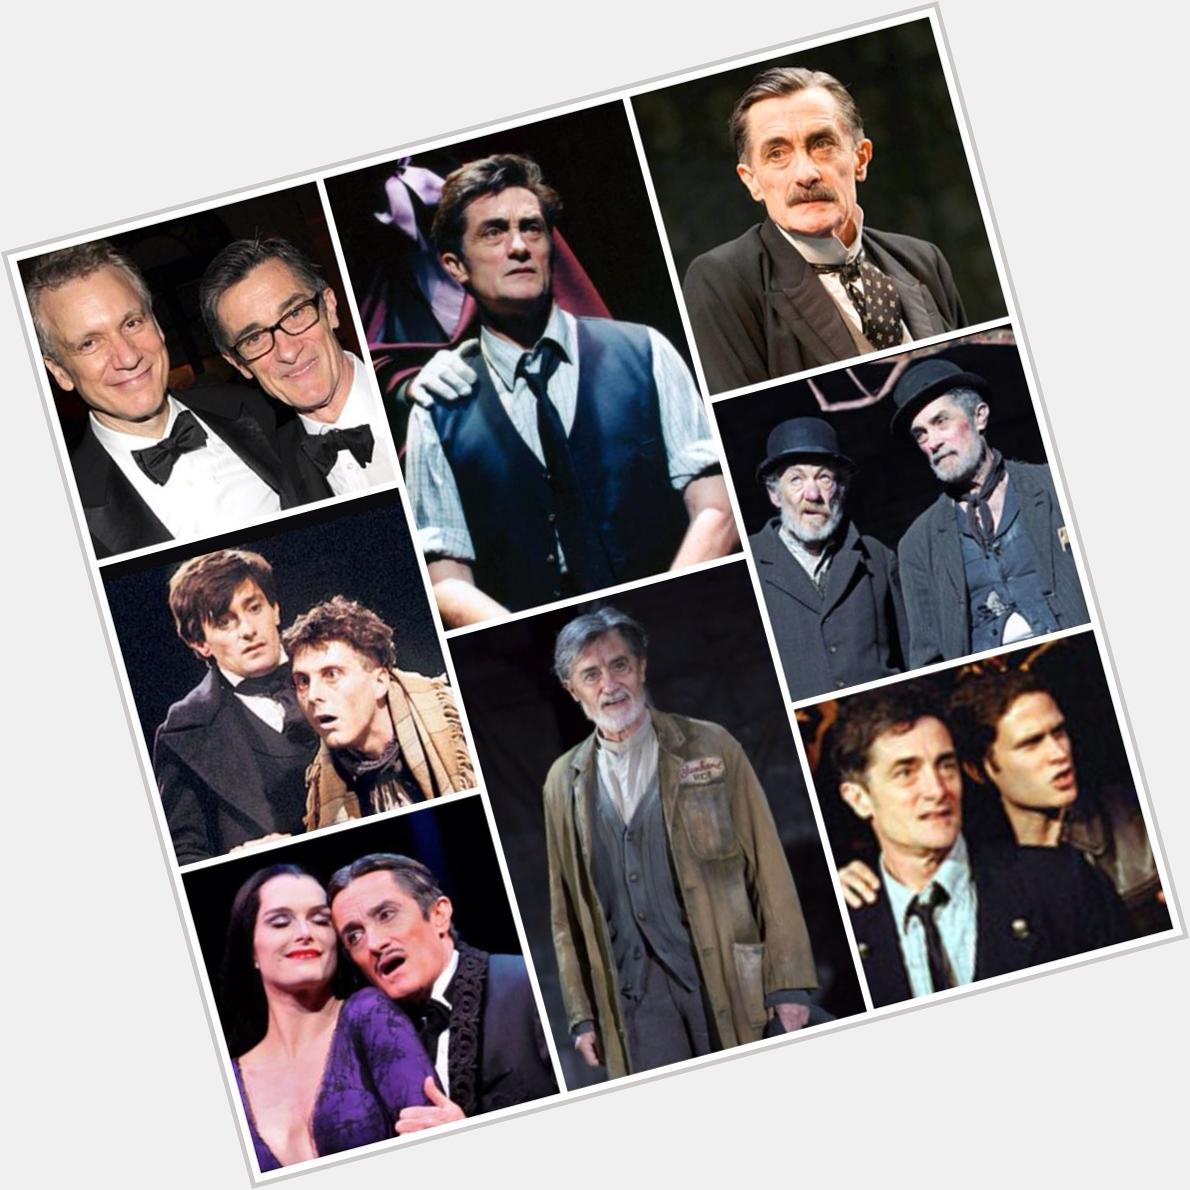 Happy Birthday to Tony Award winner Roger Rees currently starring in ^Ricky